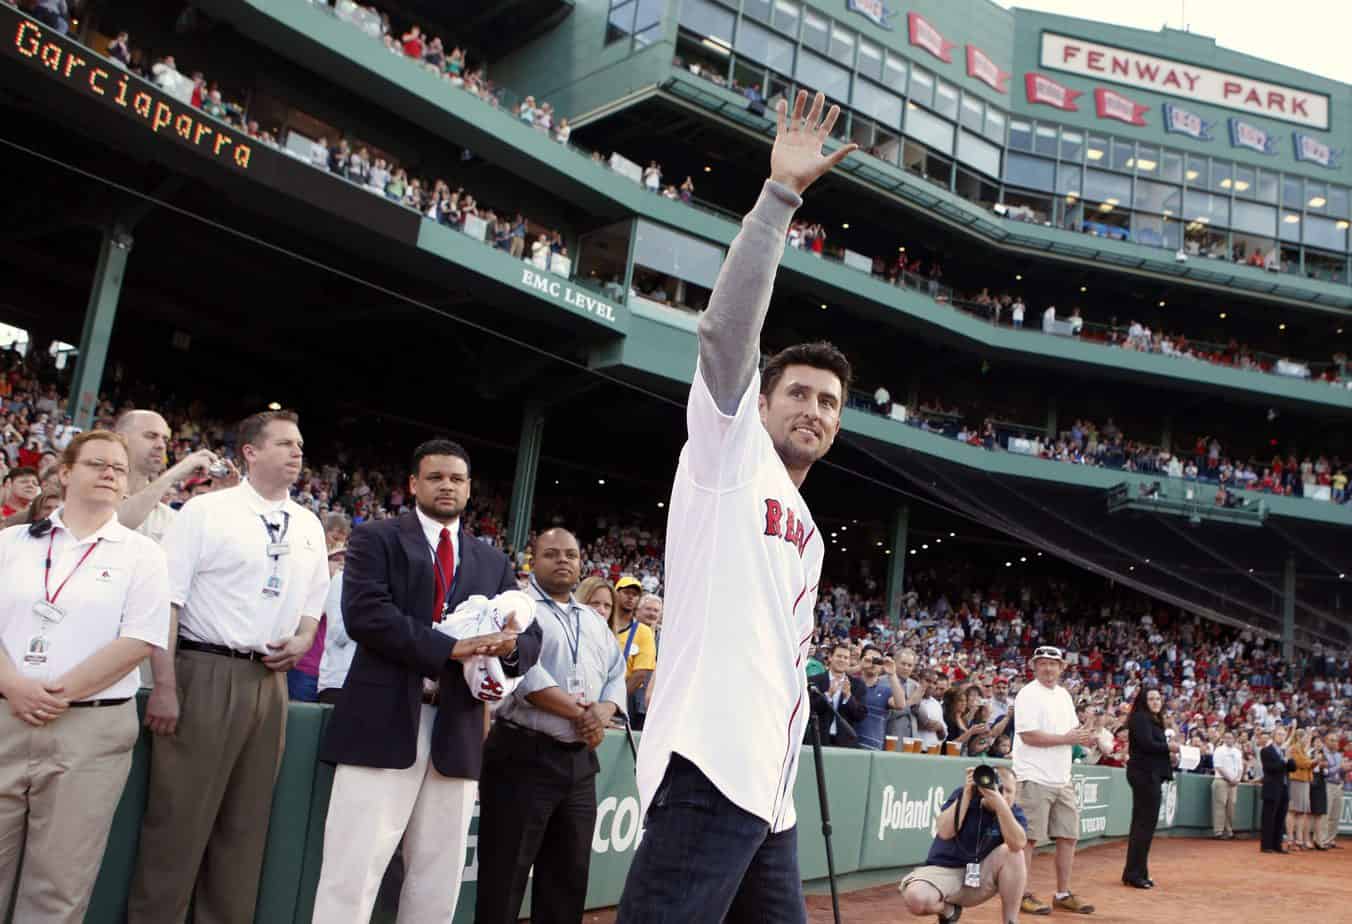 On Derek Jeter's Hall of Fame induction day, many Red Sox fans were quick to make various arguments on why Nomar Garciaparra was just as good of a player